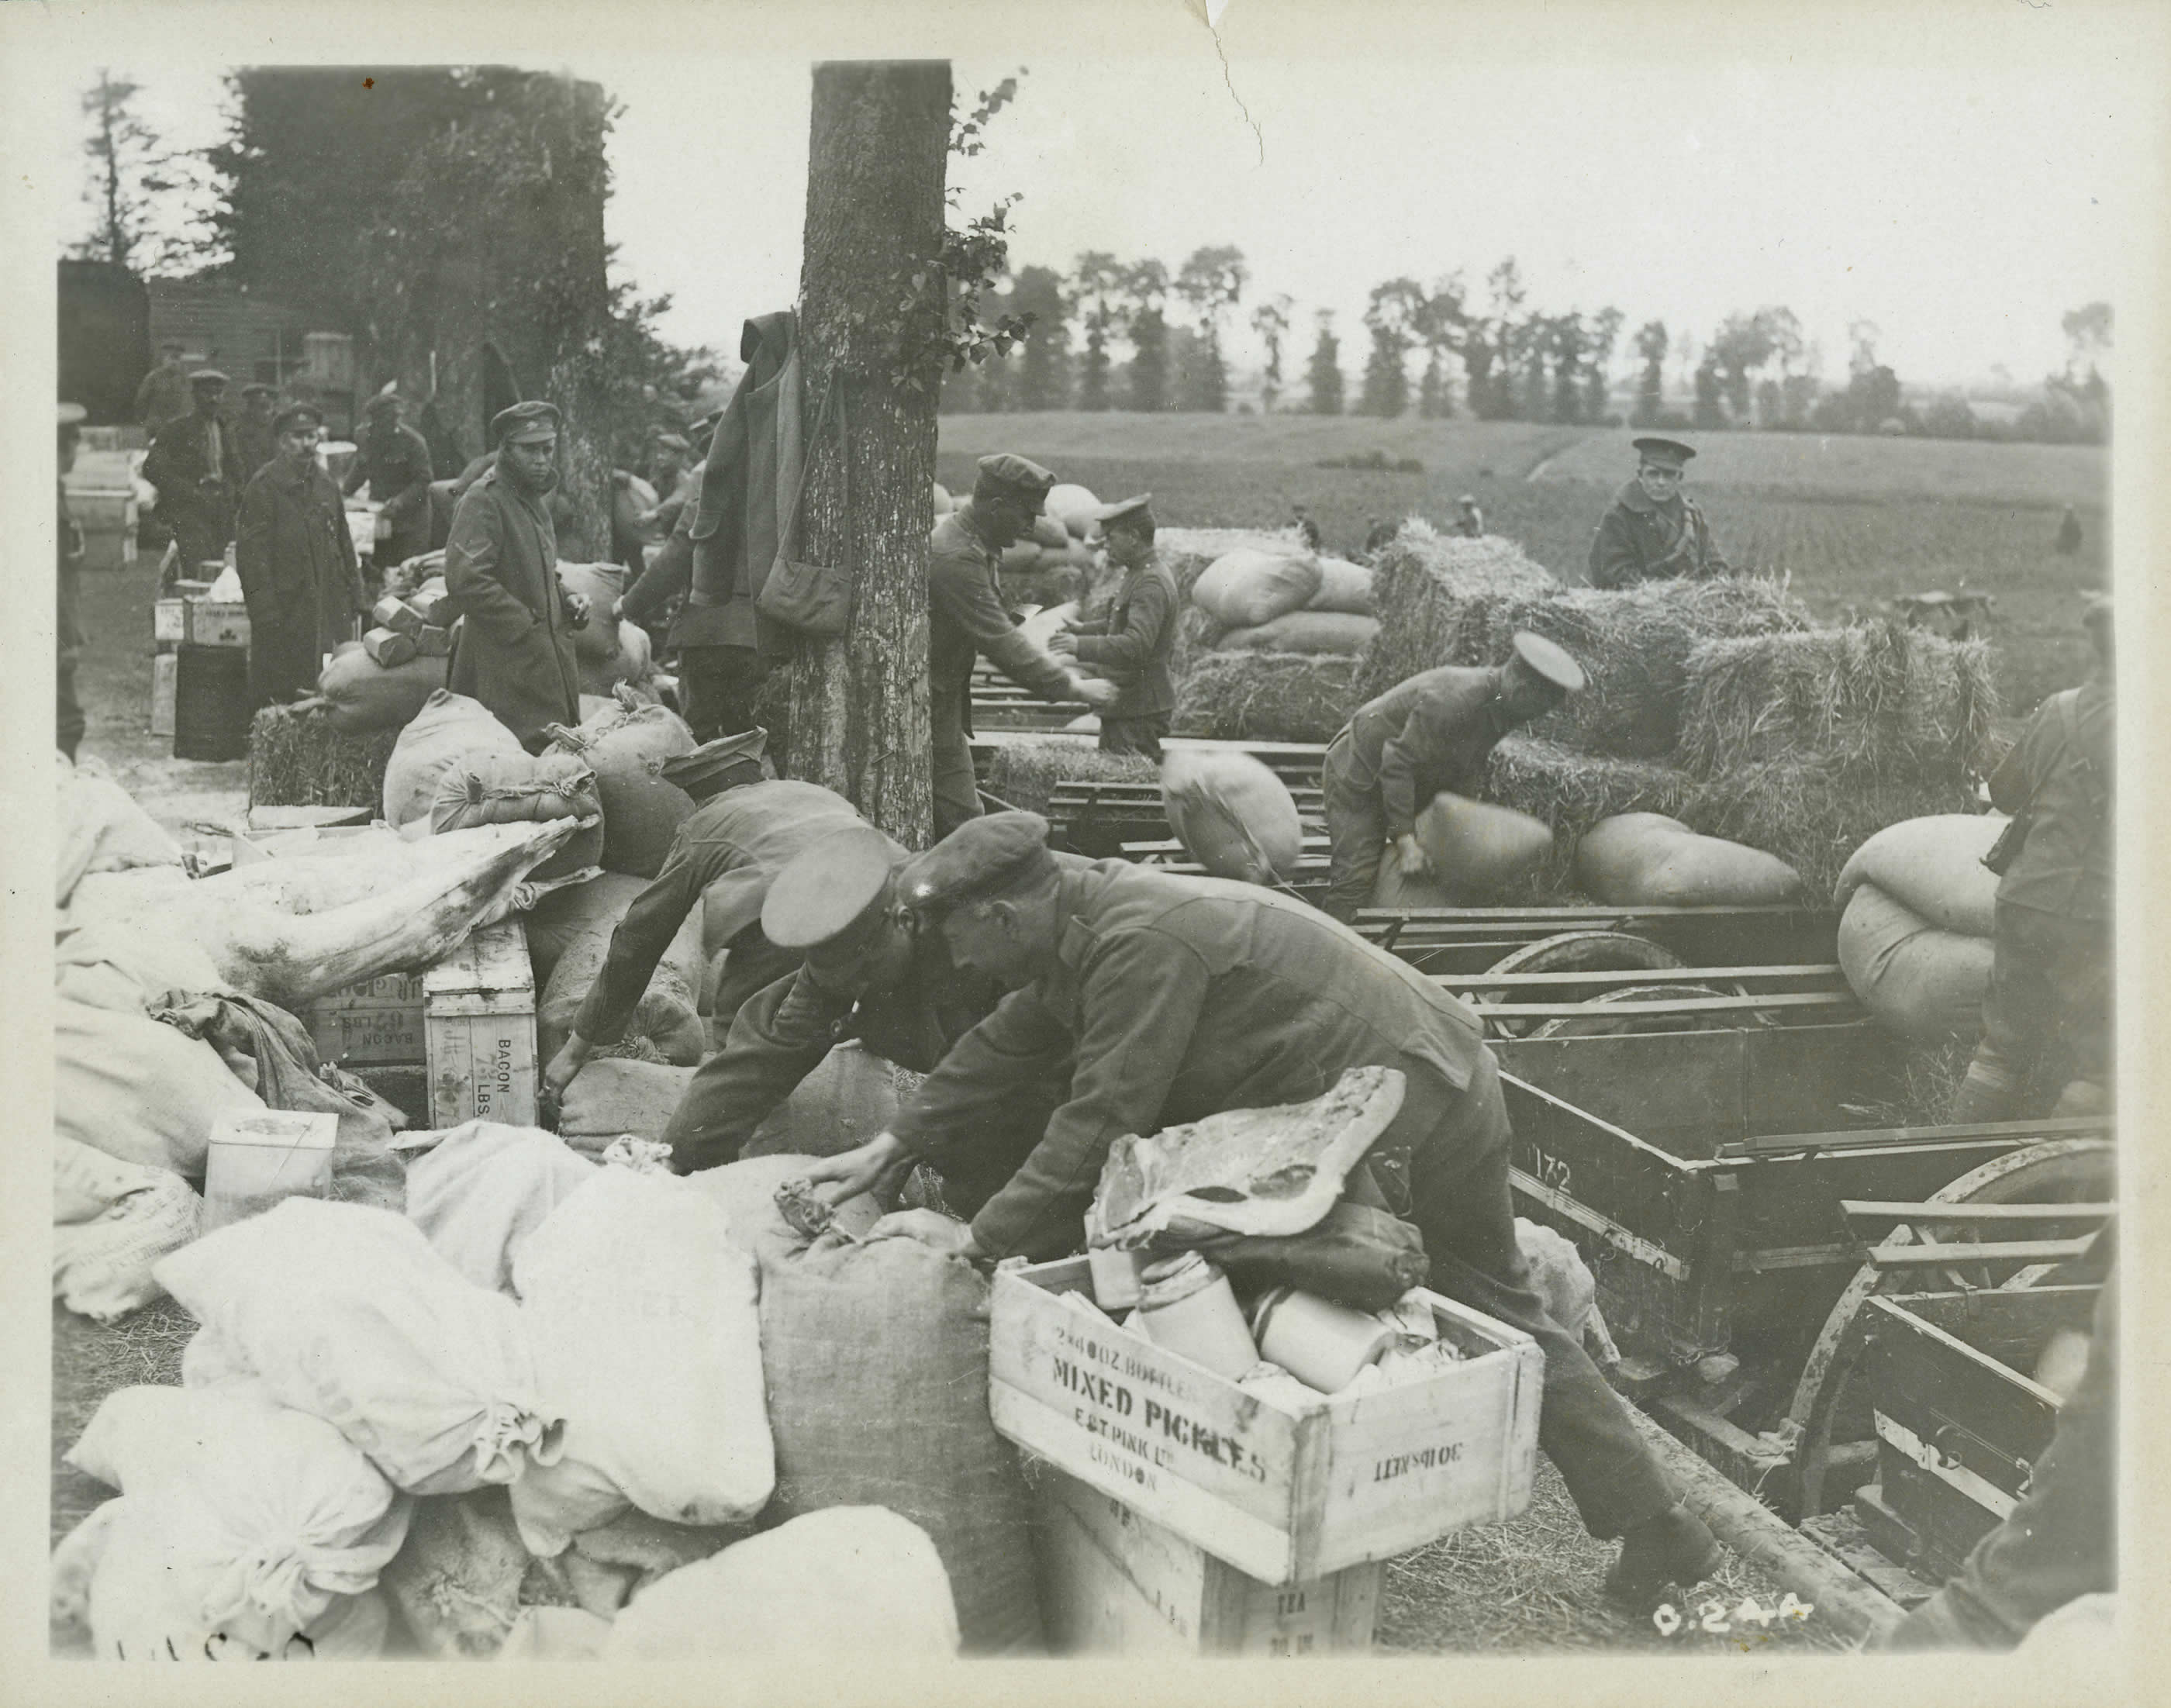 Loading Rations for the Front